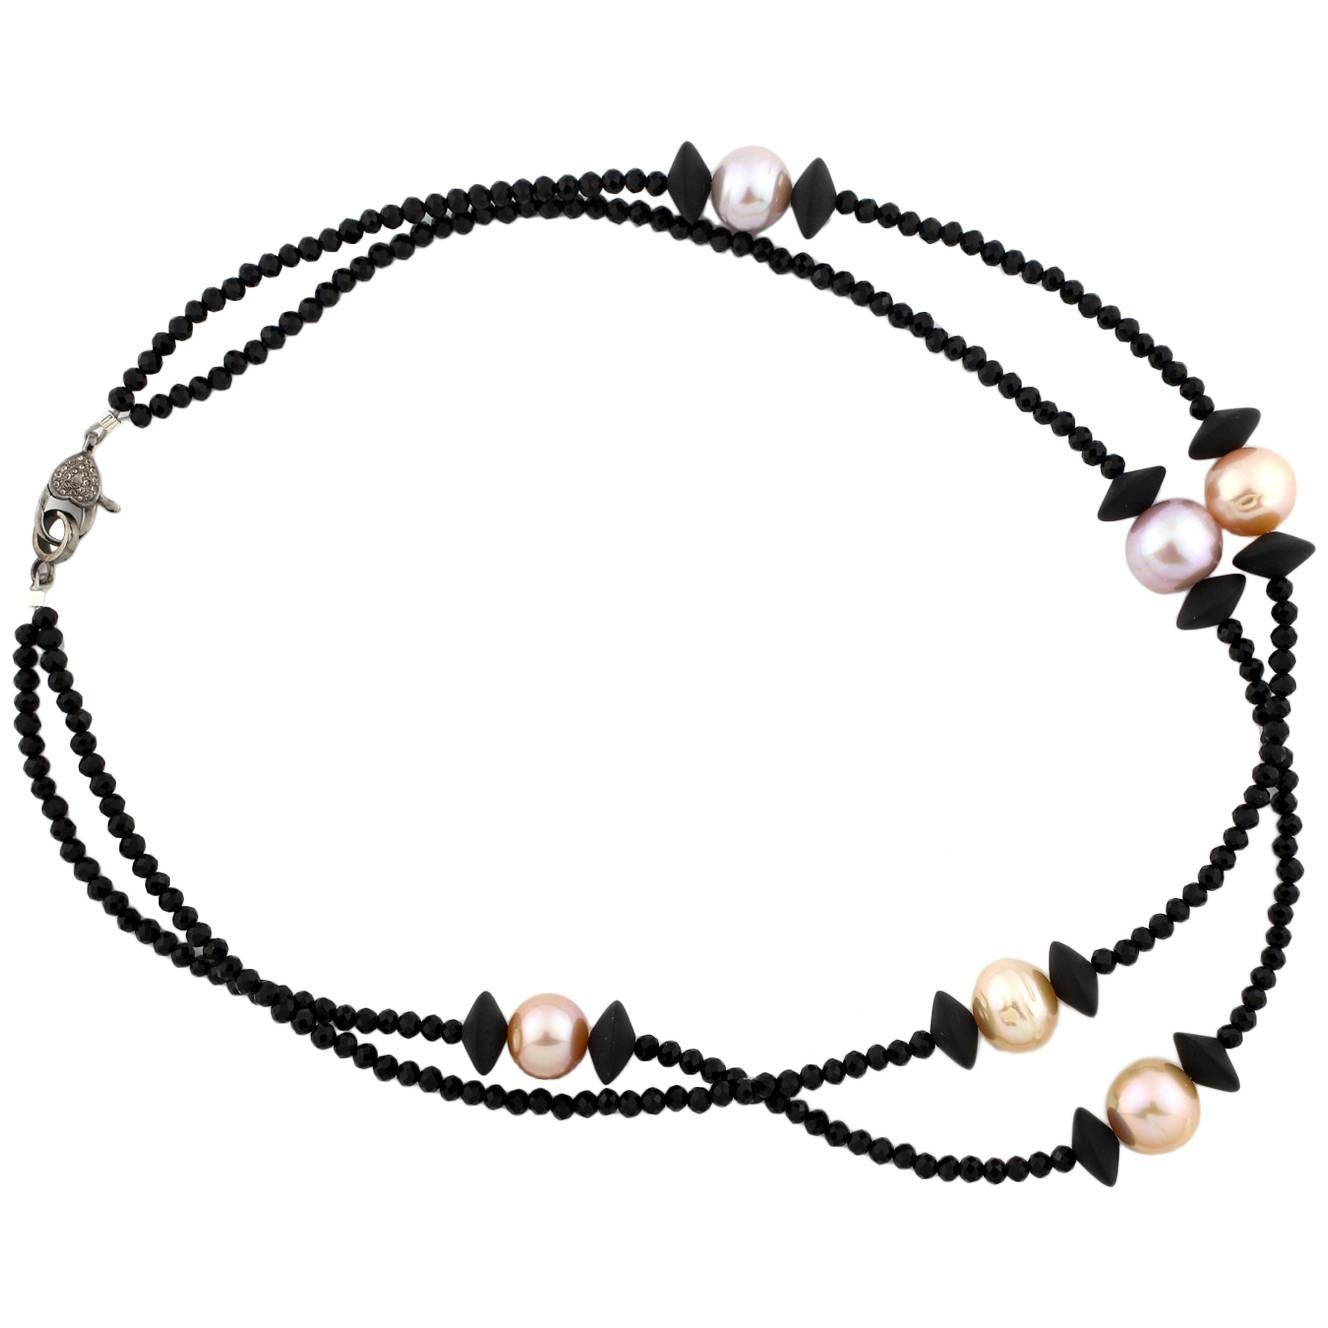 Gemjunky Double Strand Rare South Sea Pearls & Black Spinels Necklace